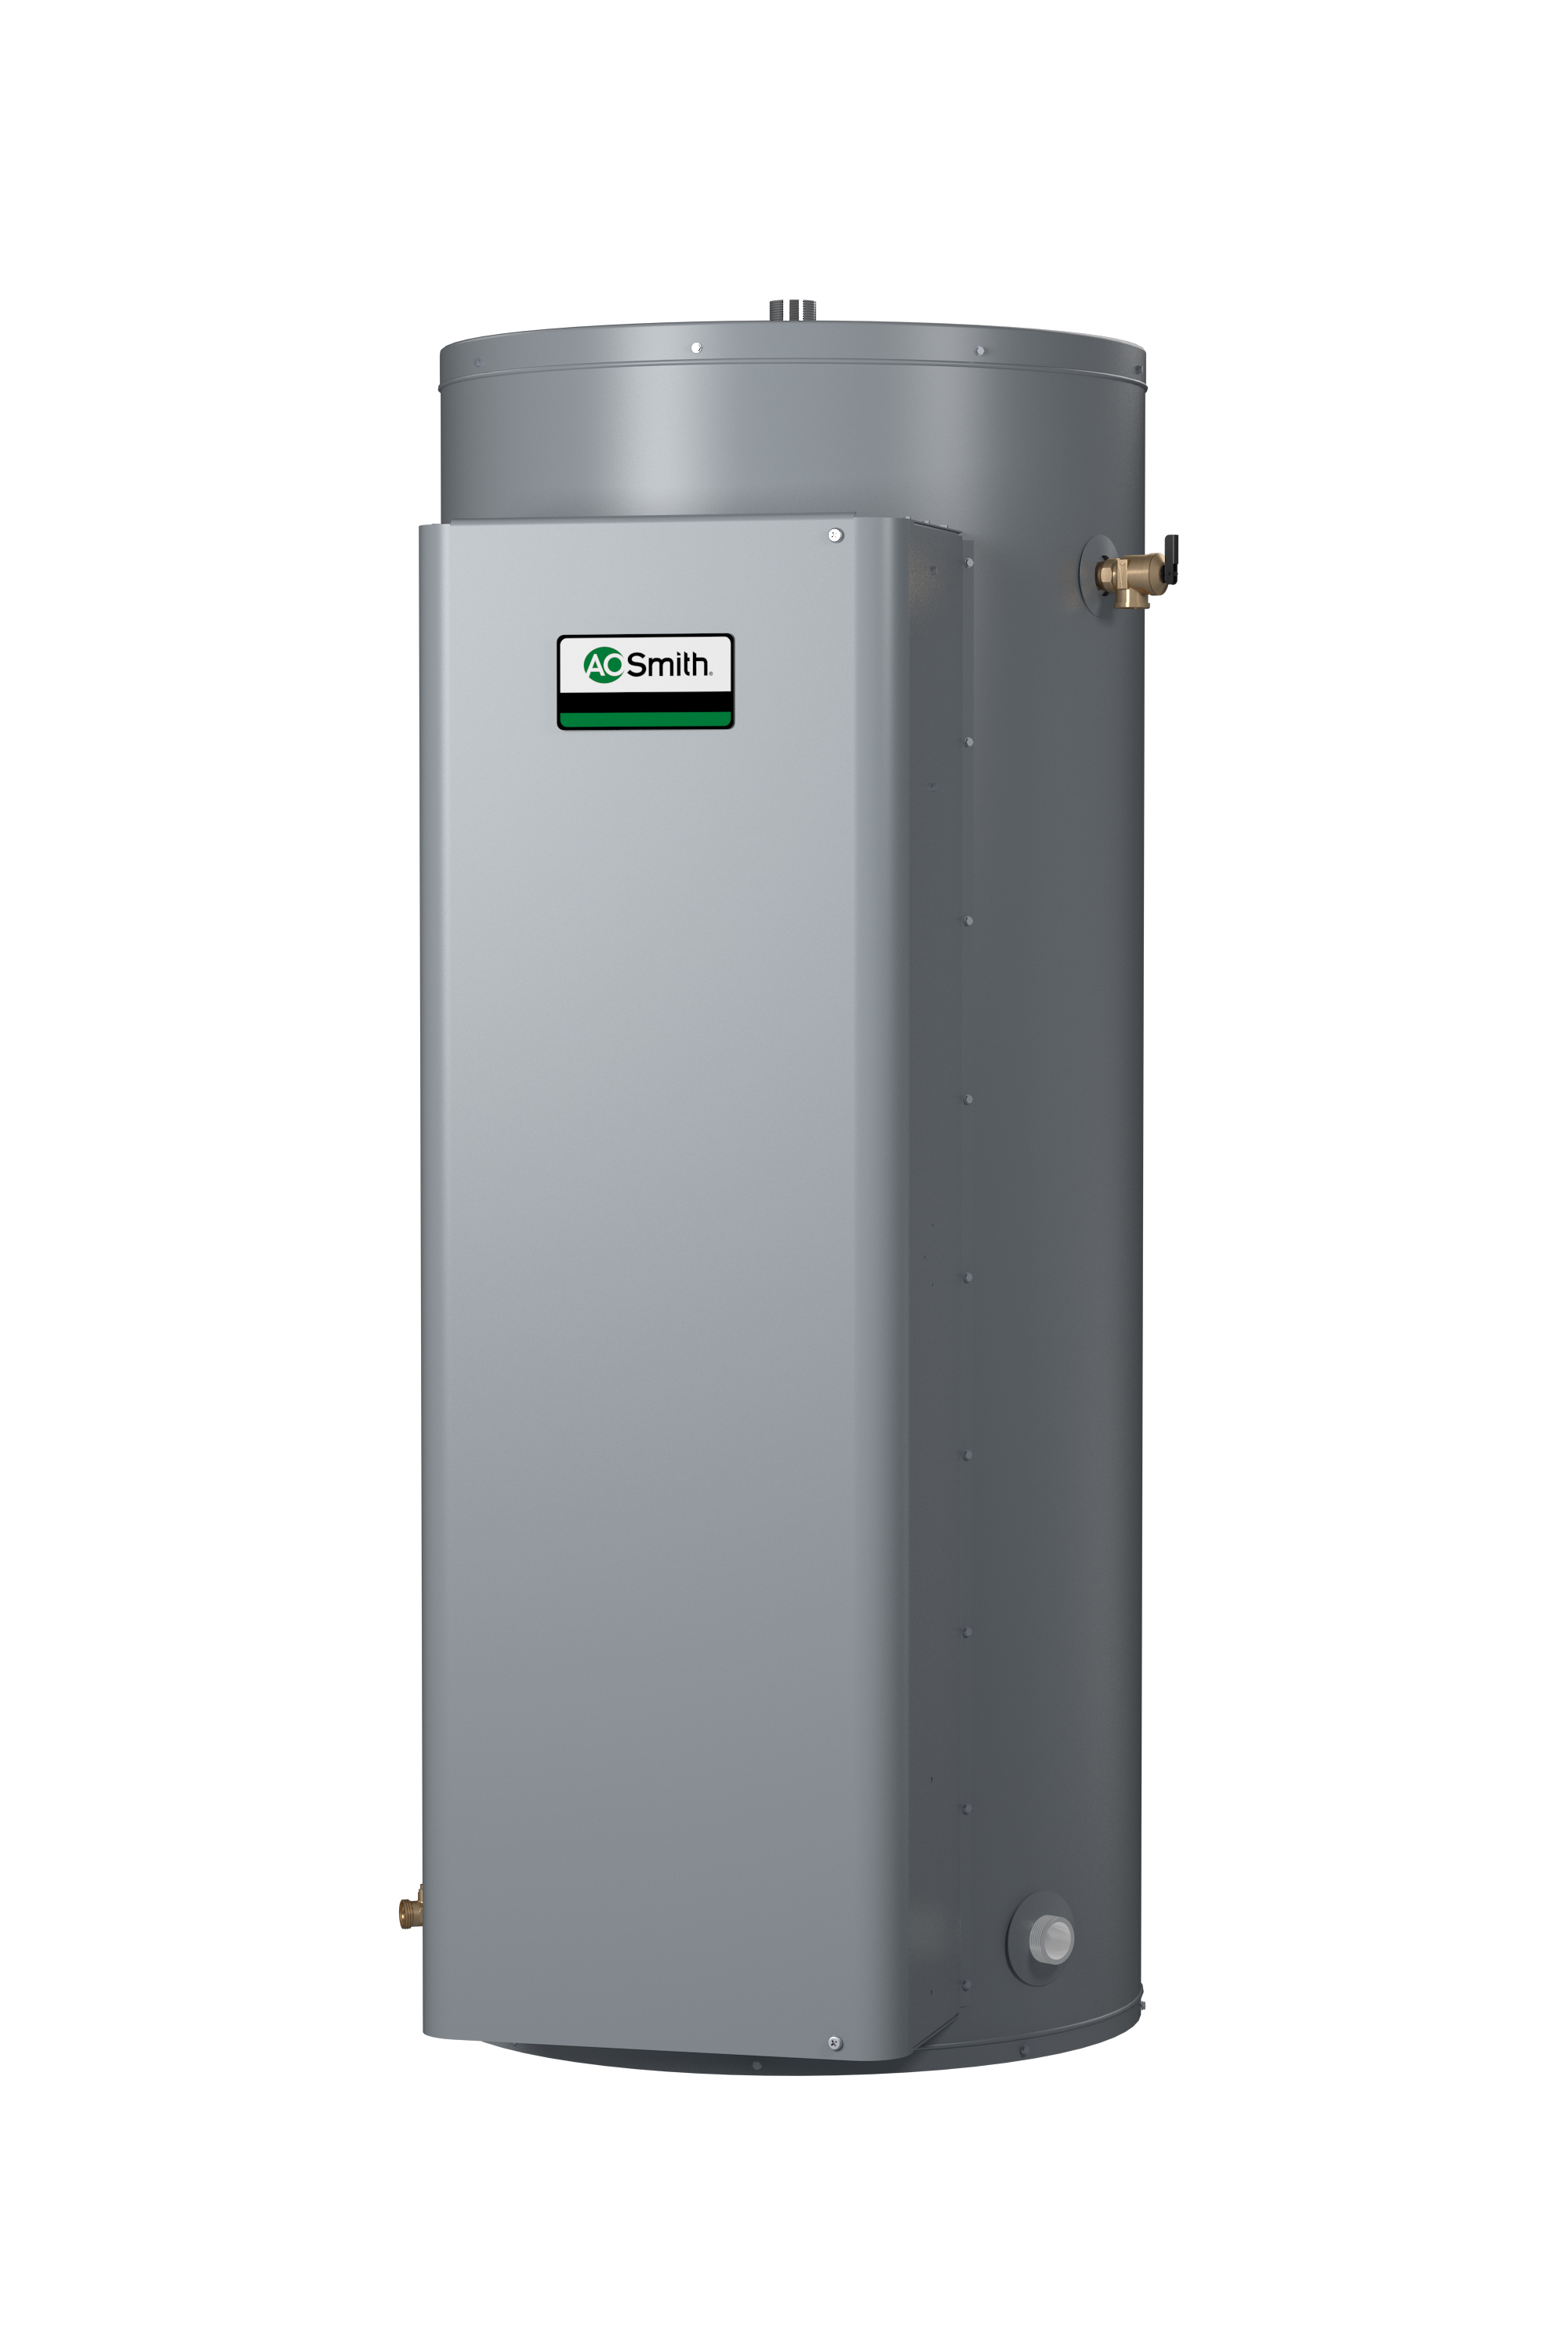 AO SMITH DRE-120-13.5, 119 GALLON, 13.5KW, 240 VOLT, 32.51 AMPS, 3 PHASE, 3 ELEMENT, COMMERCIAL ELECTRIC WATER HEATER, GOLD SERIES